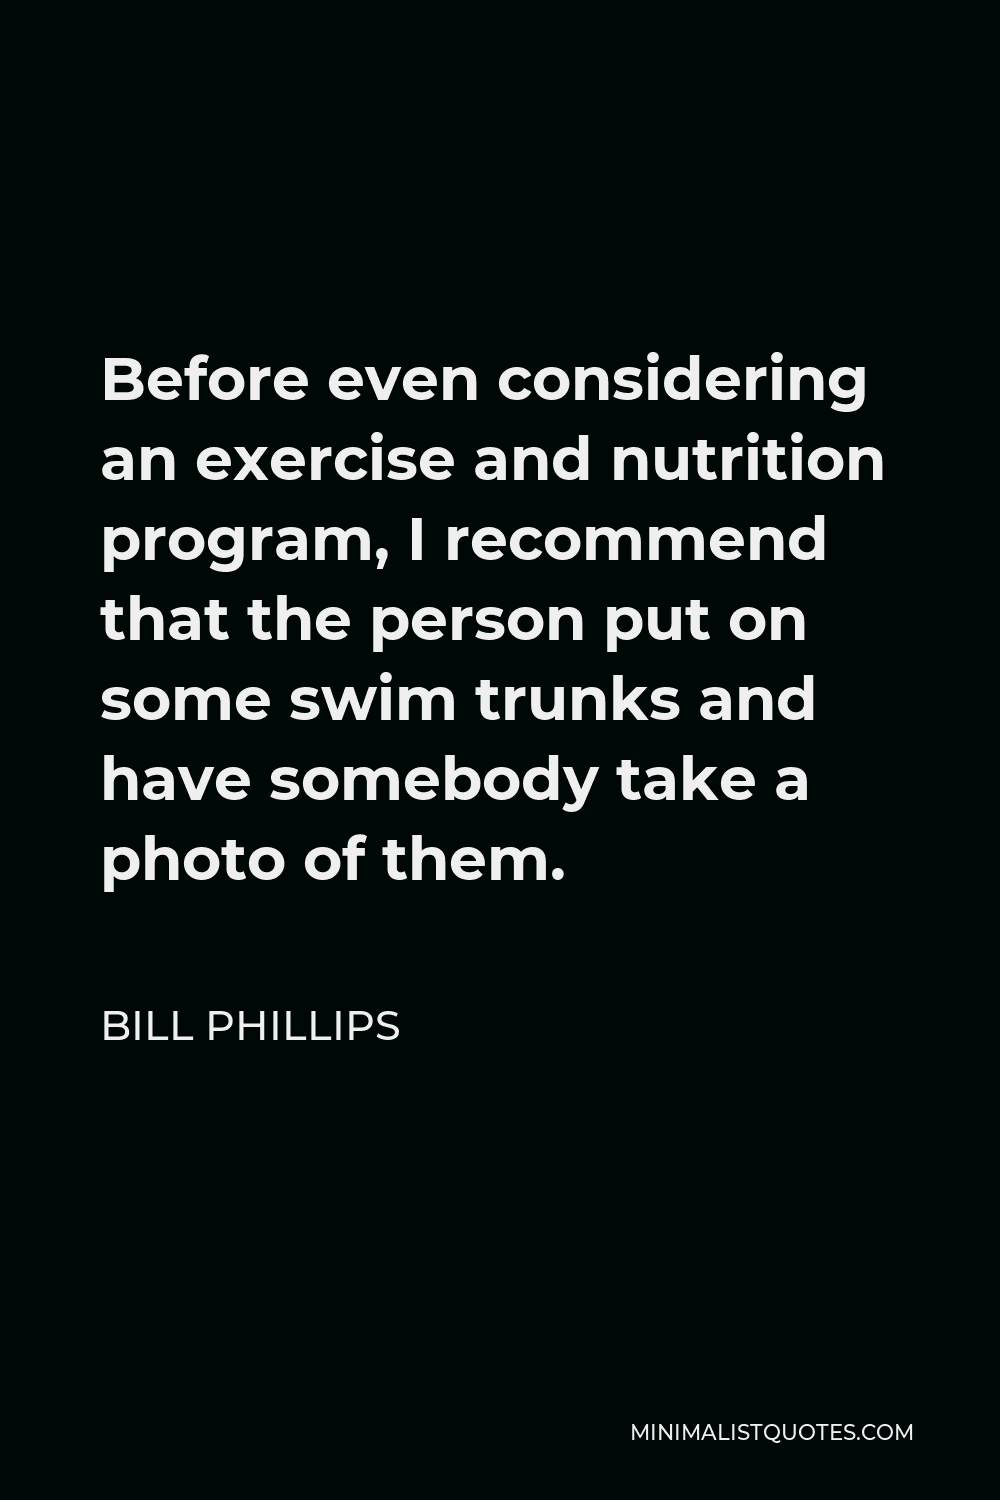 Bill Phillips Quote - Before even considering an exercise and nutrition program, I recommend that the person put on some swim trunks and have somebody take a photo of them.